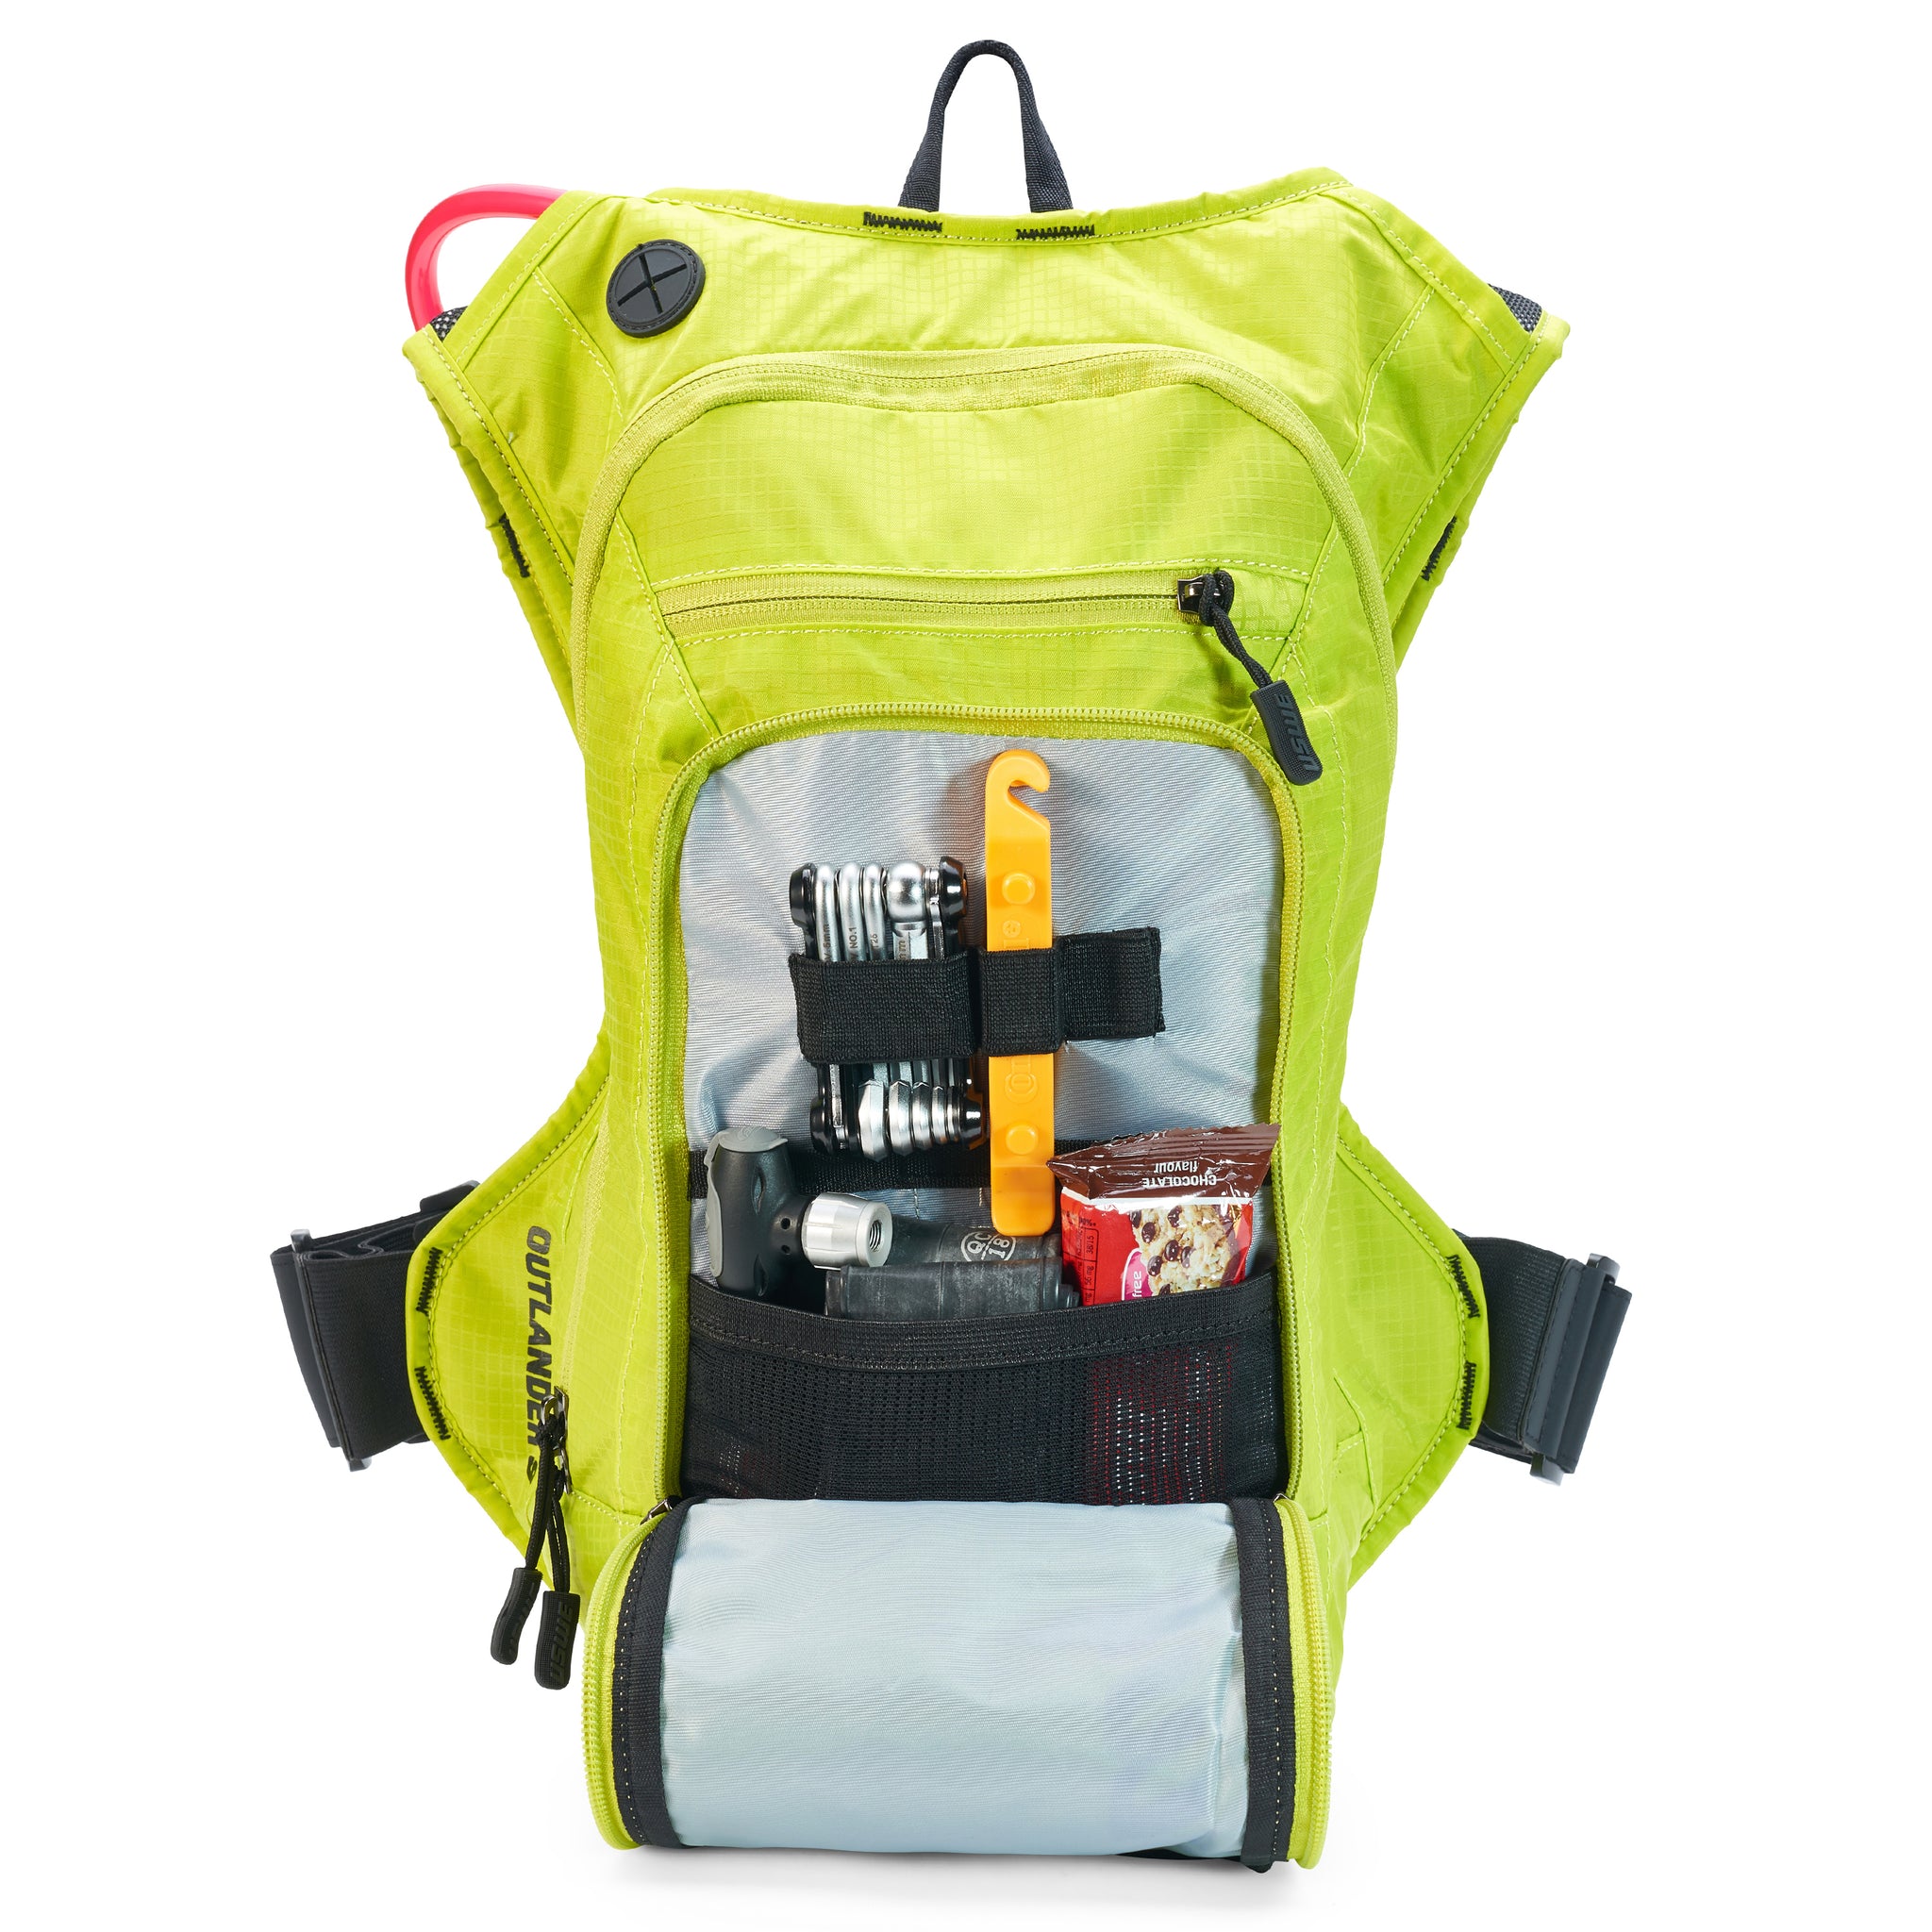 Outlander 9 Hydration System Crazy Yellow